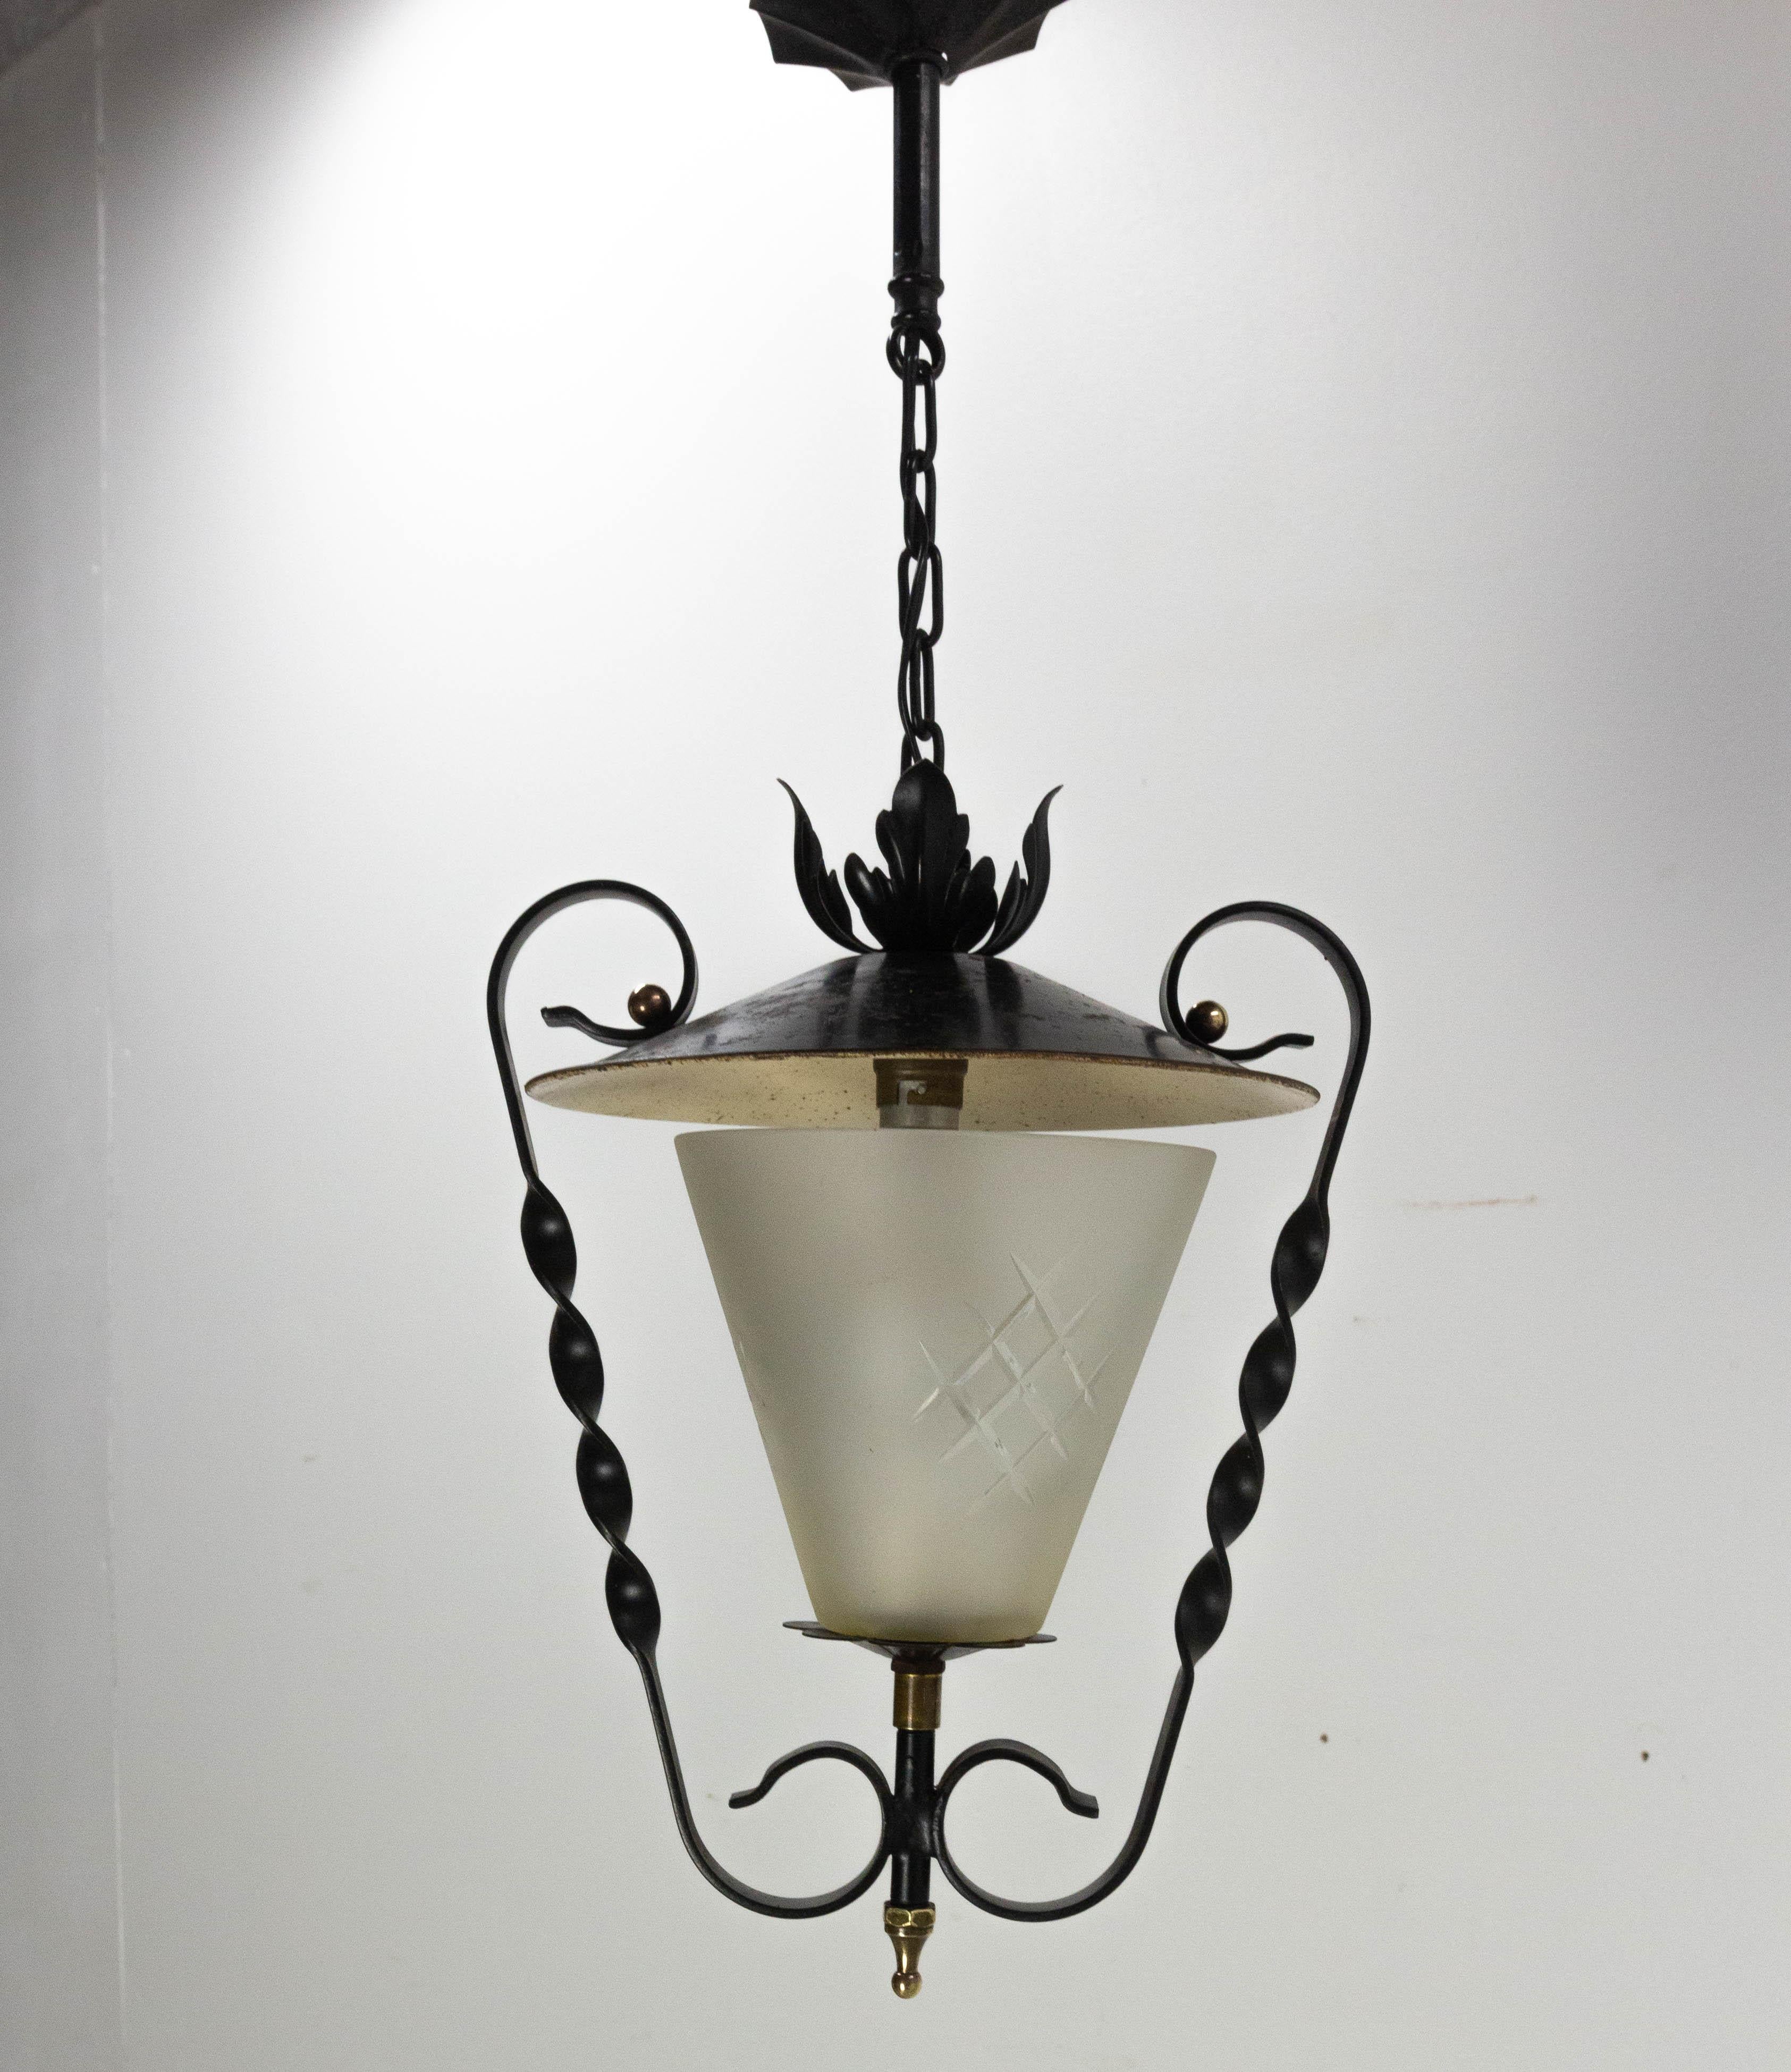 Pendant light chandelier, France, midcentury
Frosted glass globe 
Wrought iron and glass
Vegetal inspiration.
This can be rewired to USA, UK and European standards
Good condition.